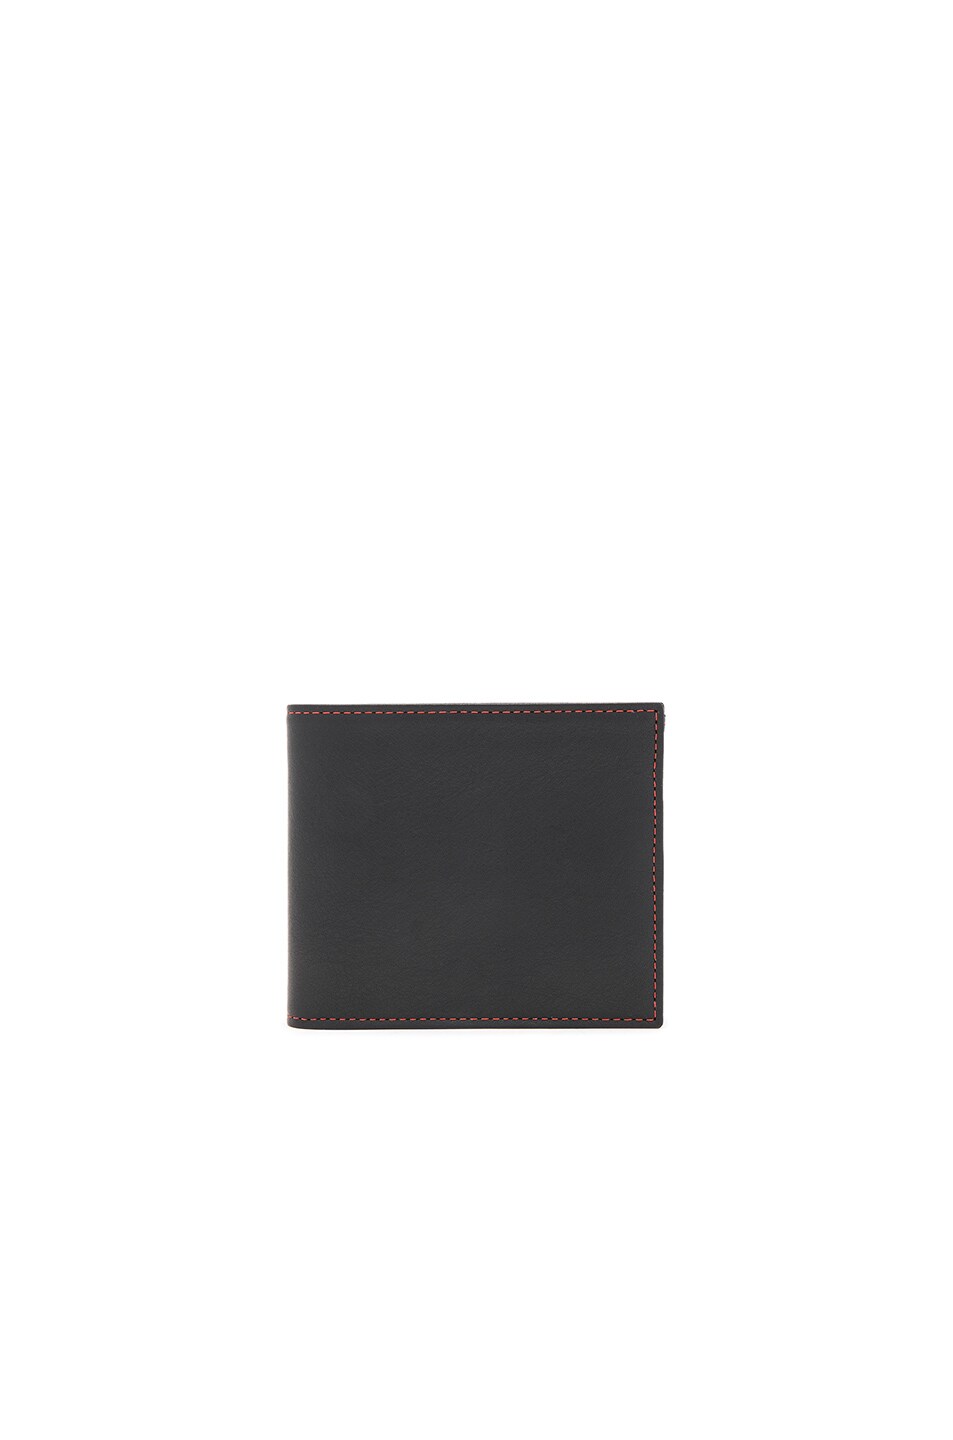 Image 1 of Maison Margiela Grained Soft Leather Billfold Wallet in Black & Red